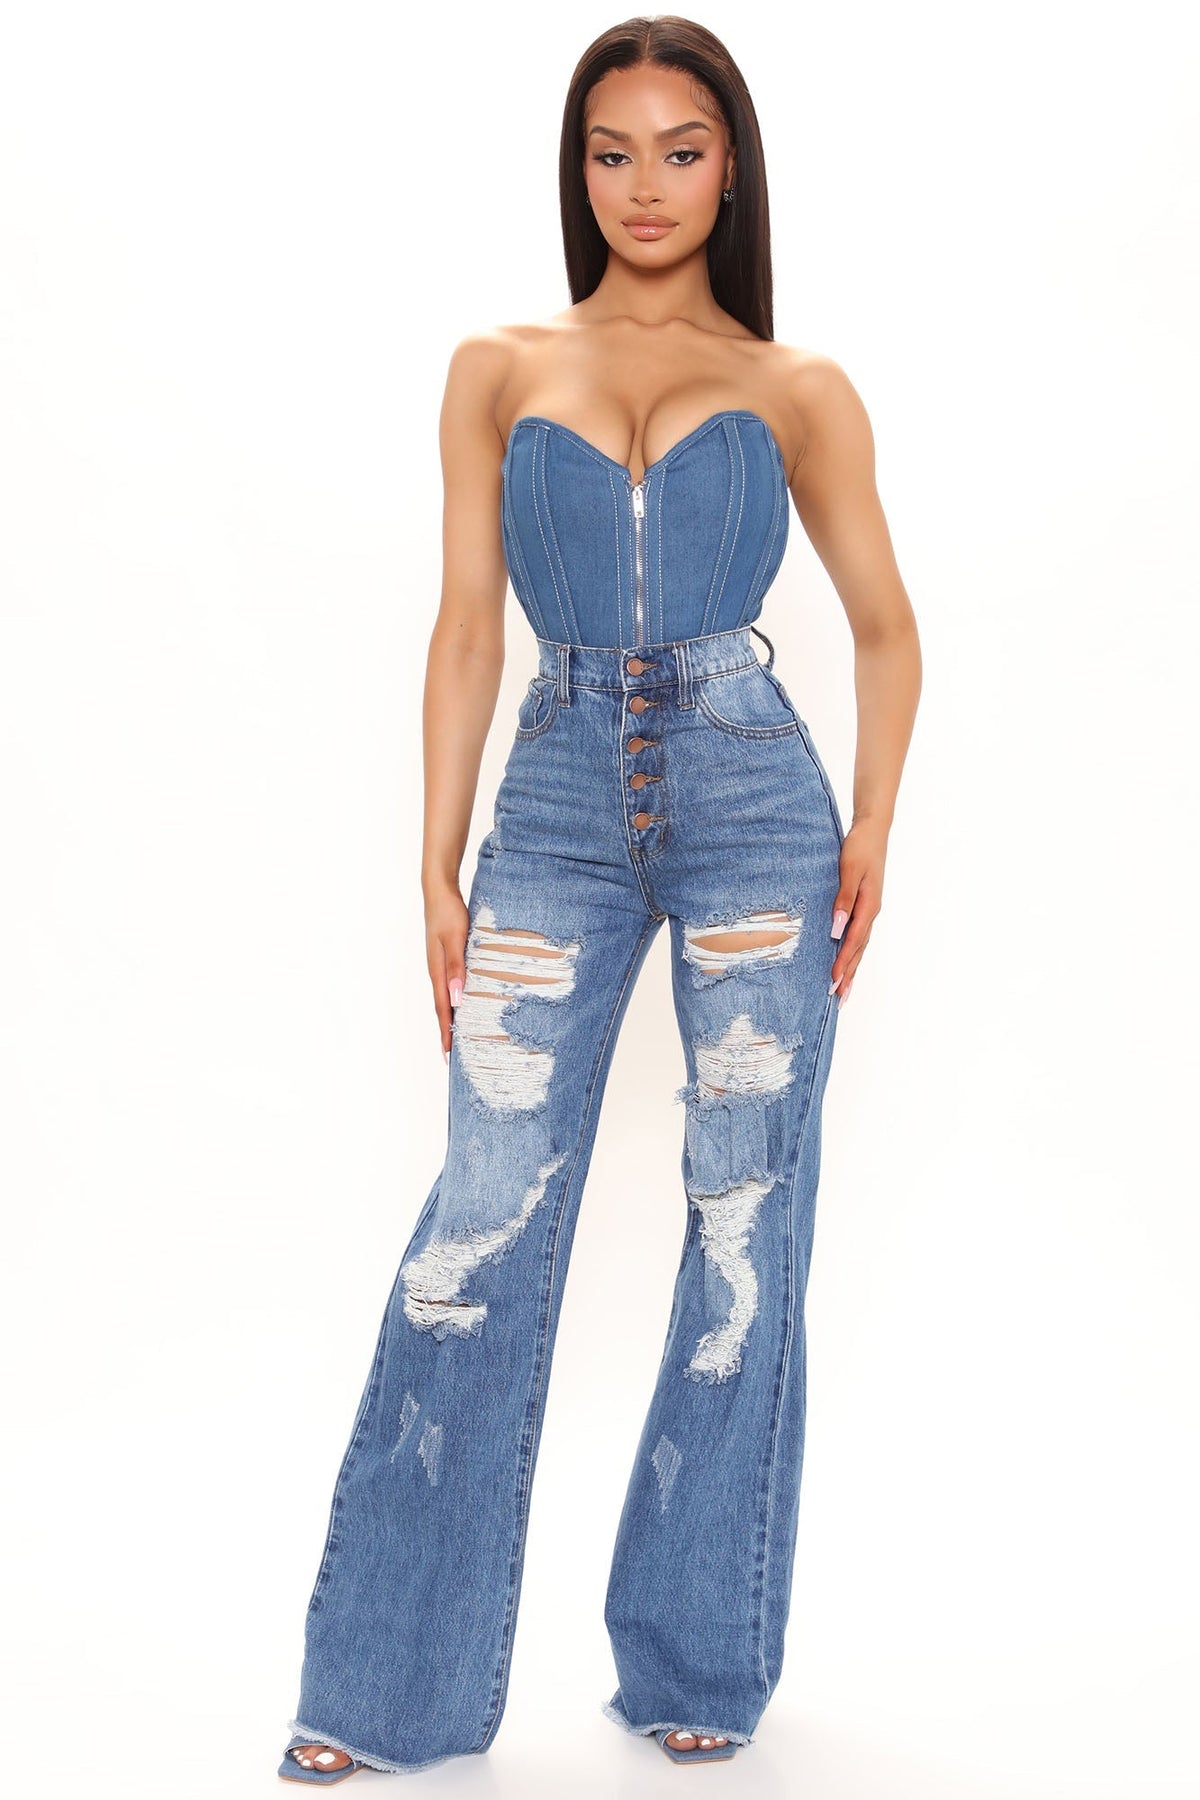 Looking For Trouble Ripped Jeans - Medium Blue Wash